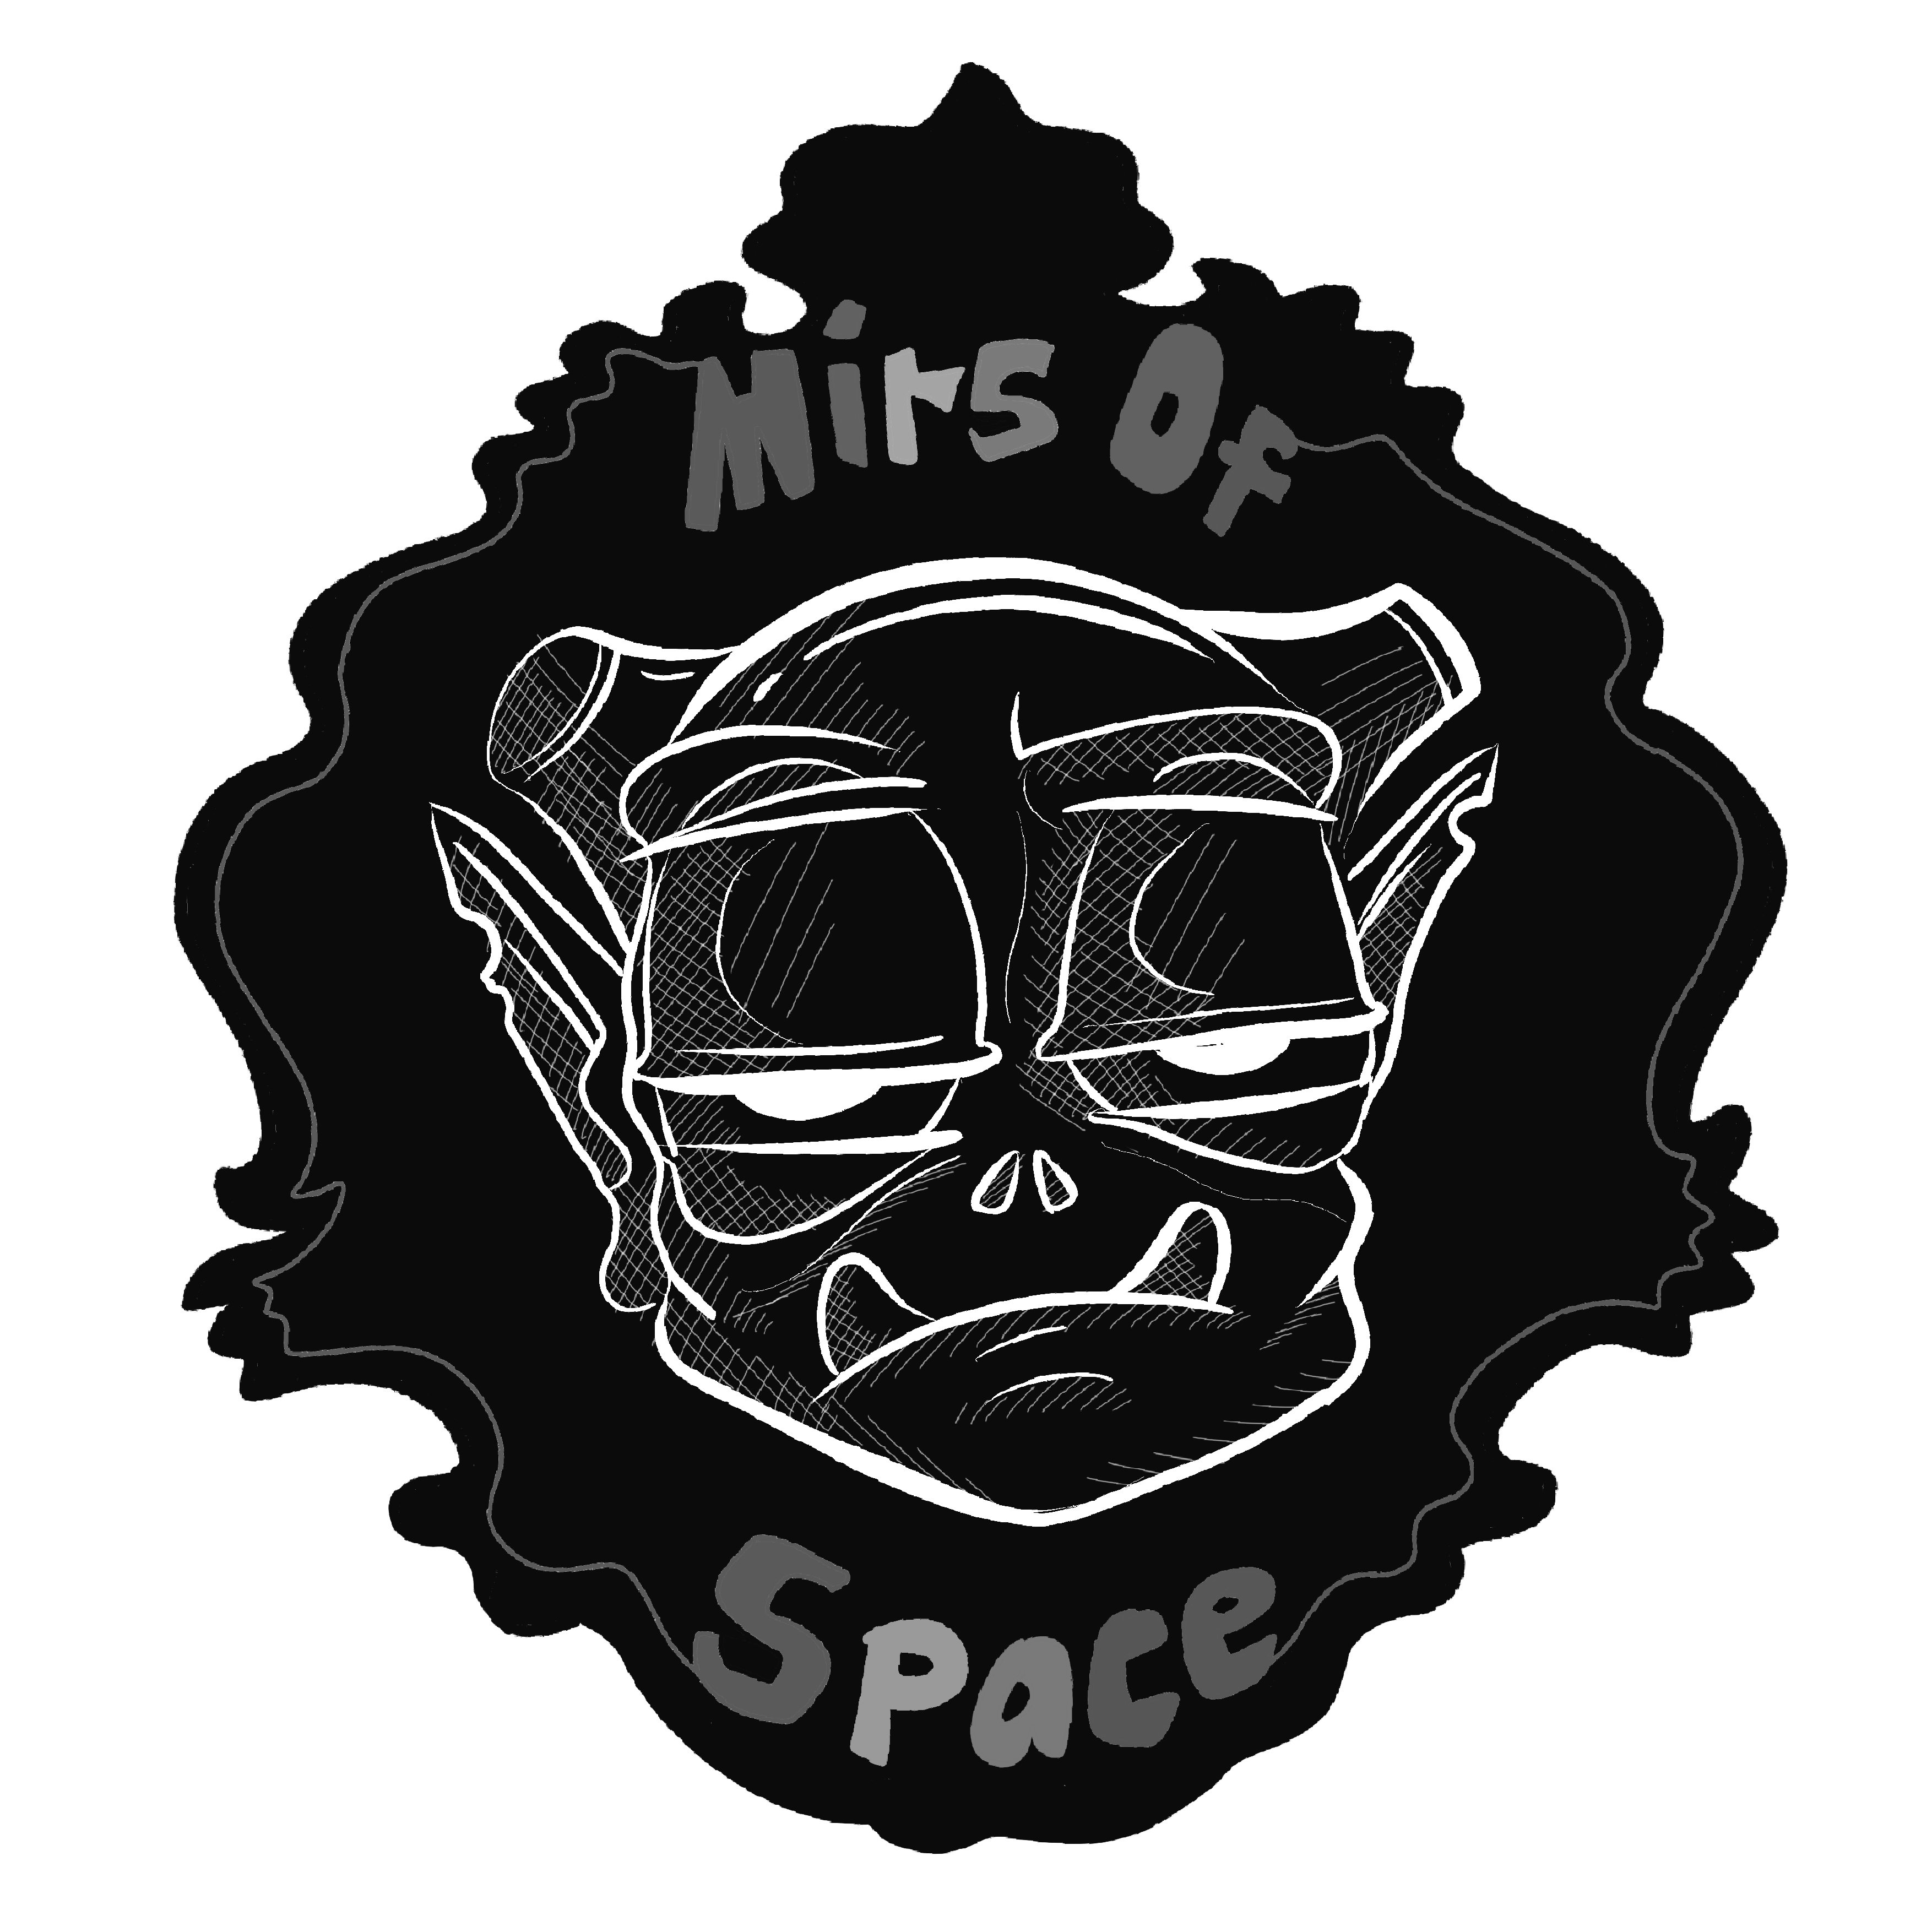 Mirs of Space banner